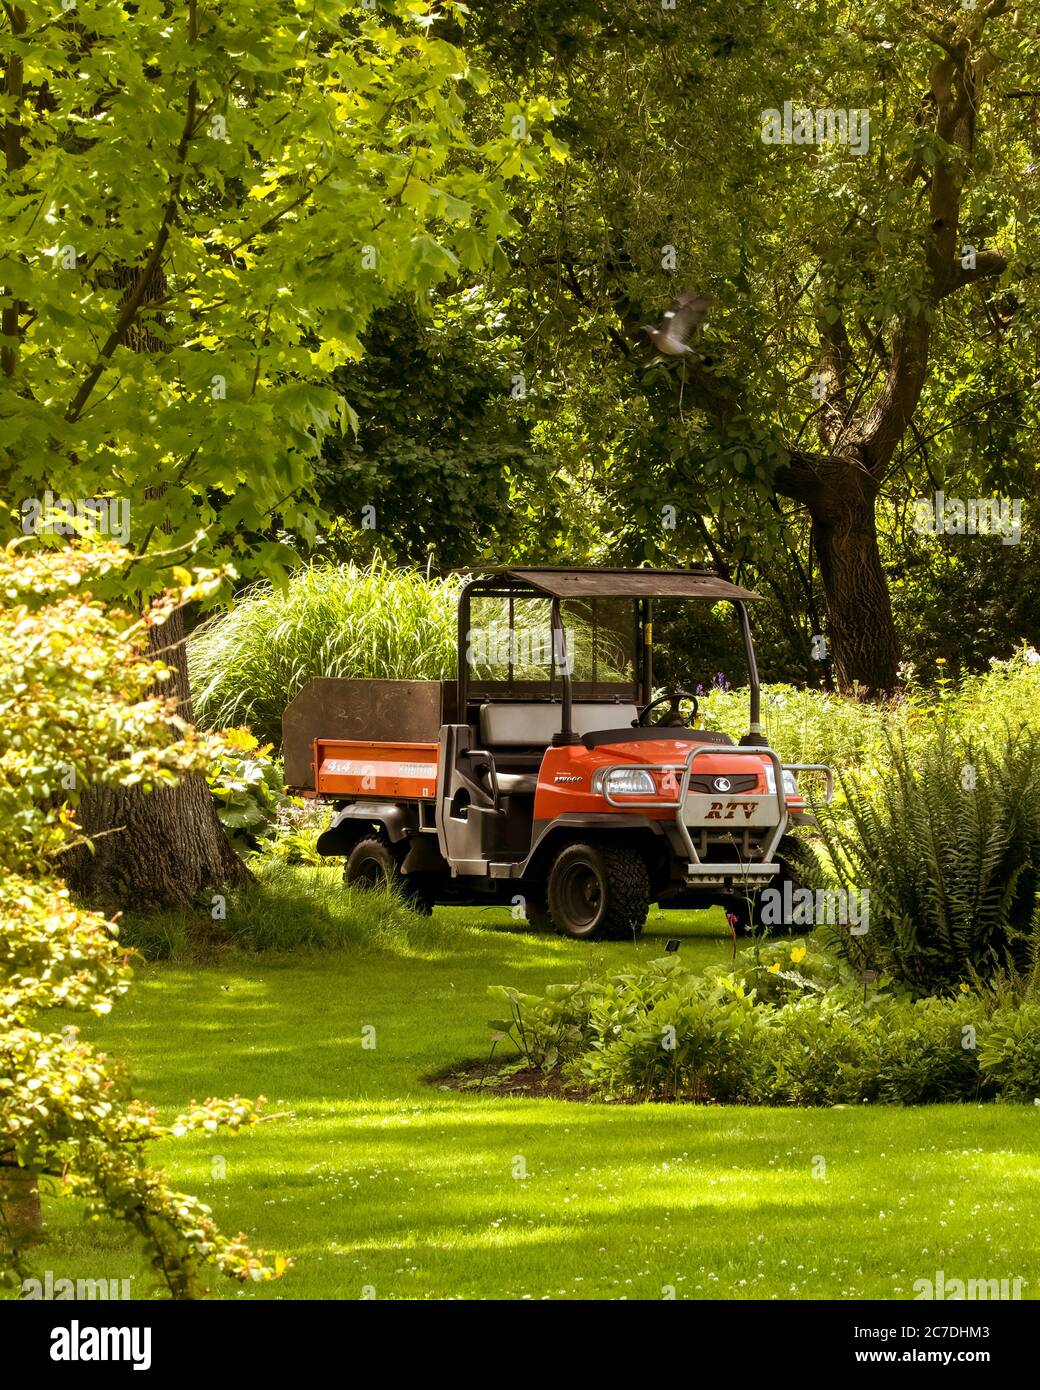 Kubota 4X4 utility vehicle in beautiful English garden with no people in view. July 19th 2020 - Diss, Norfolk, UK Stock Photo